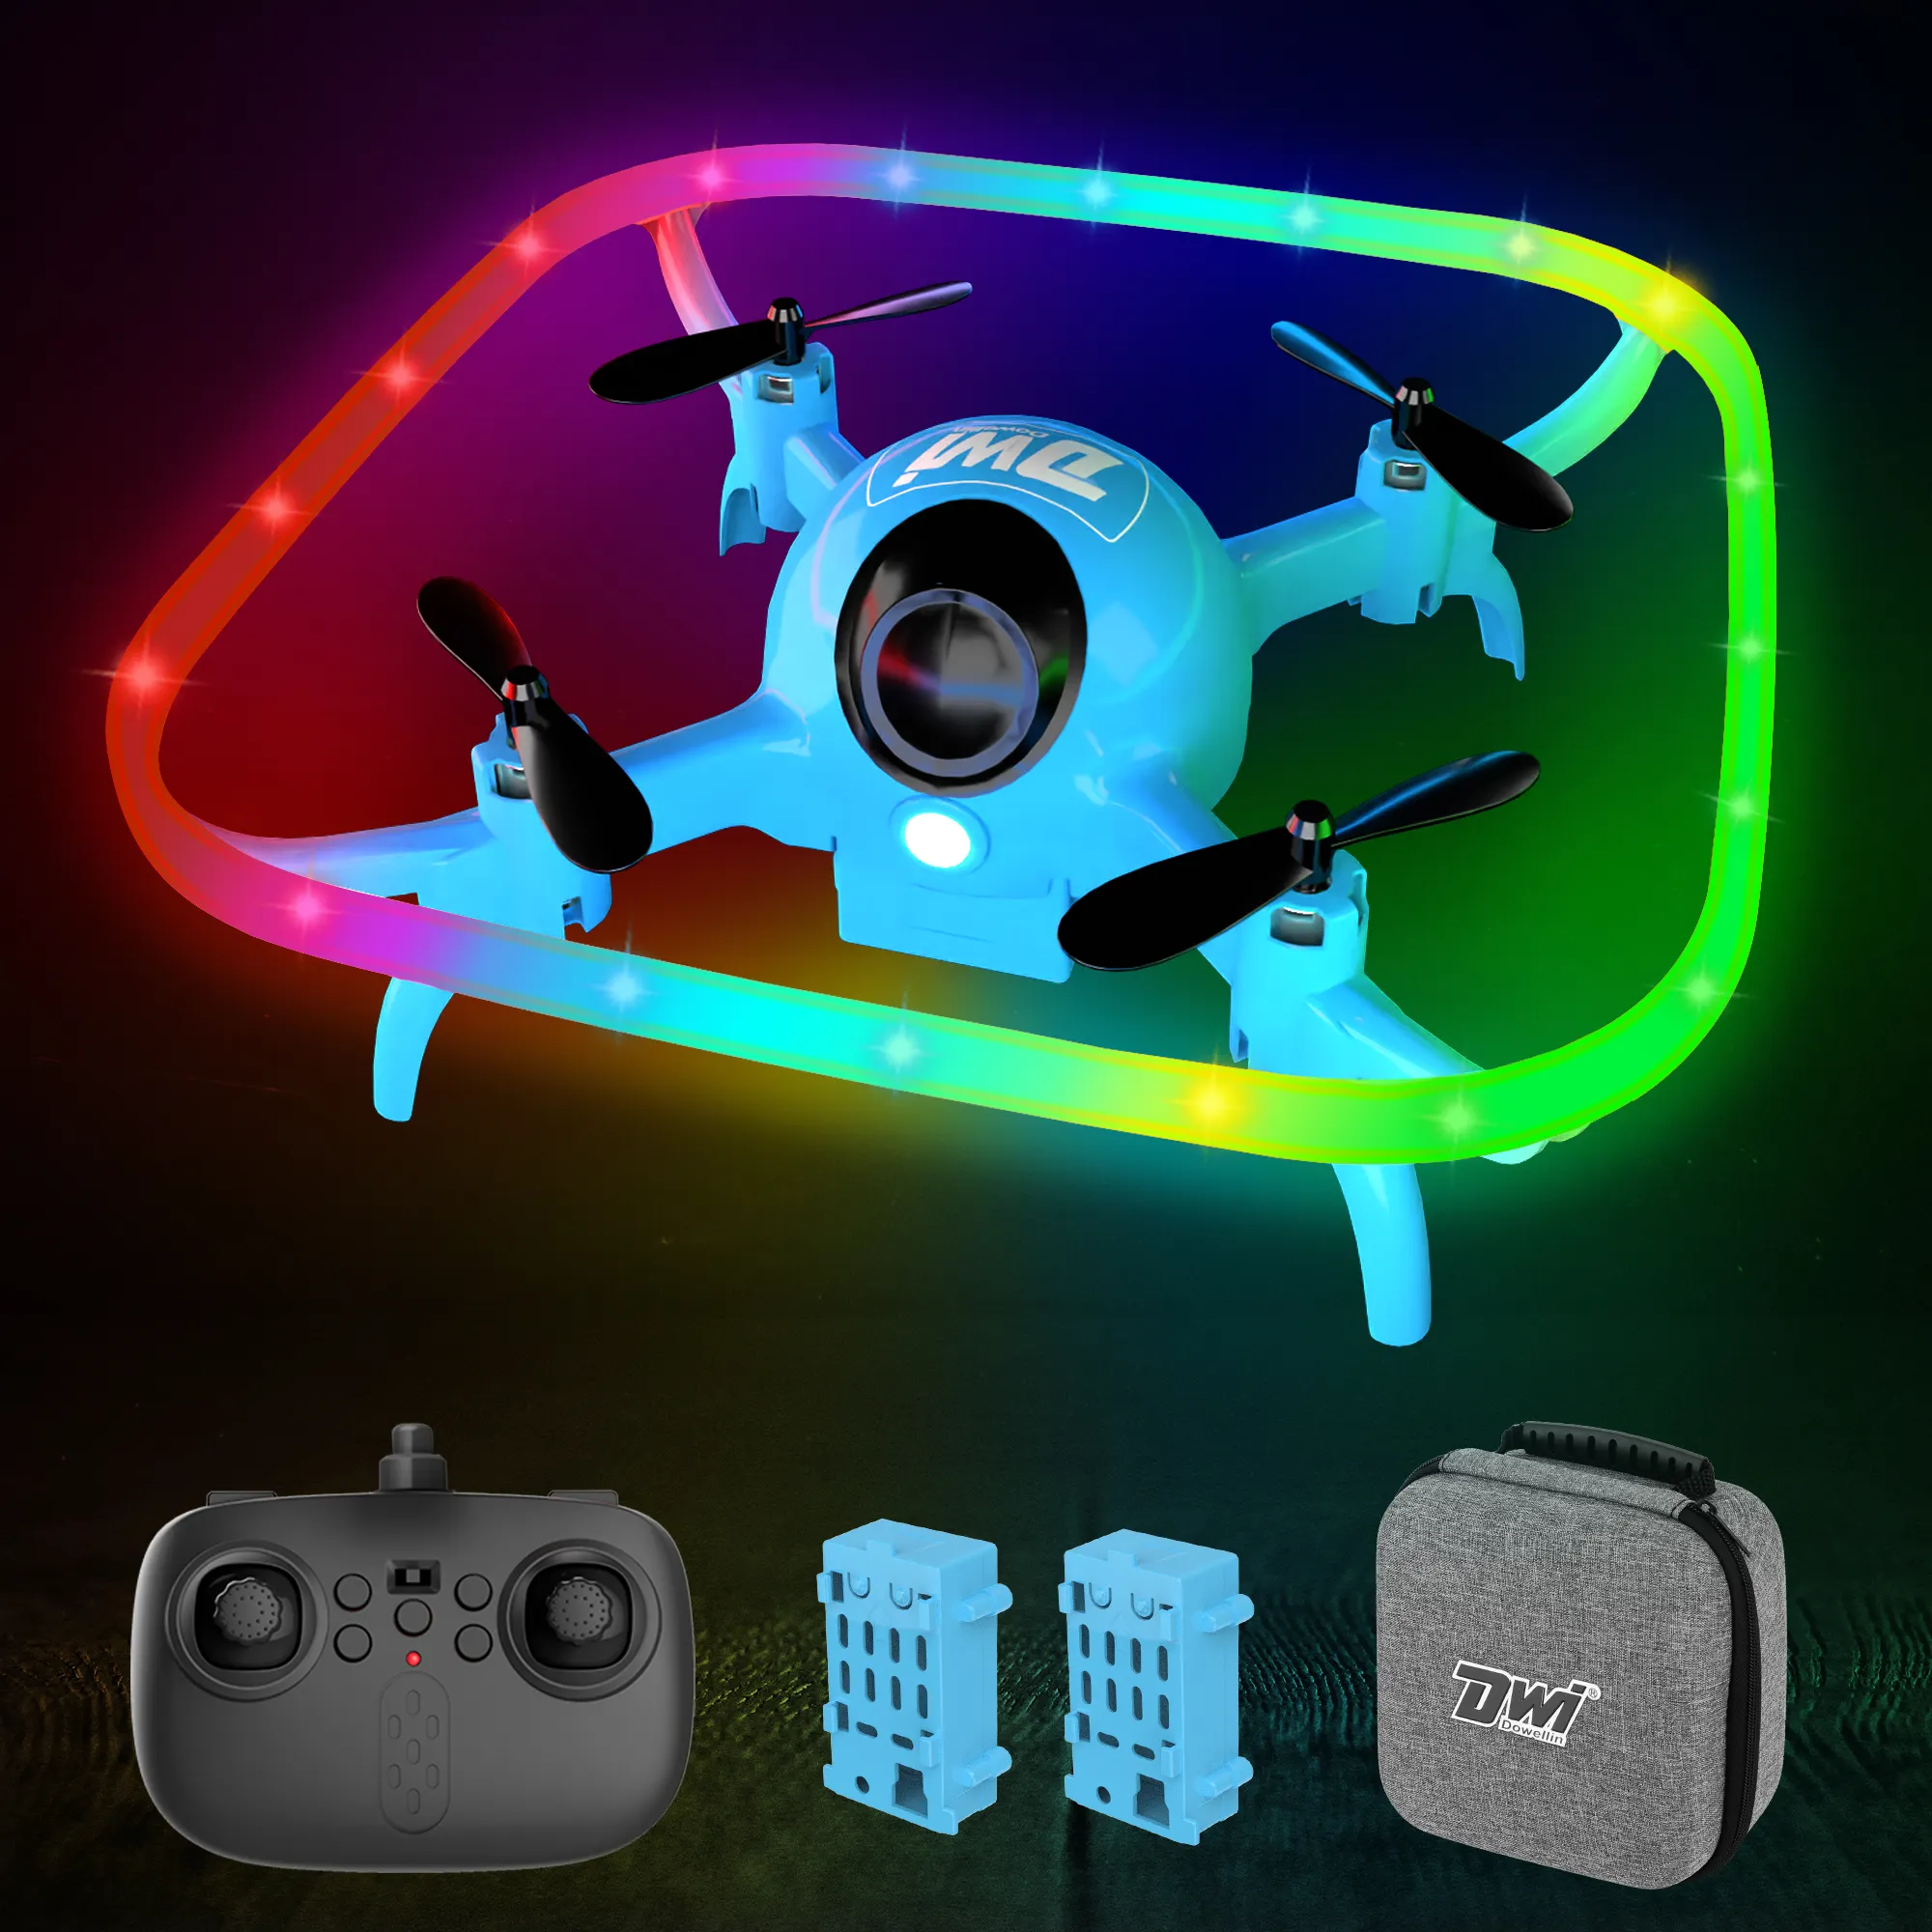 DWI 2.4G Mini Drone UFO pocket drone camera with WIFI Cameras APP Control Quadcopter Low price for Kids